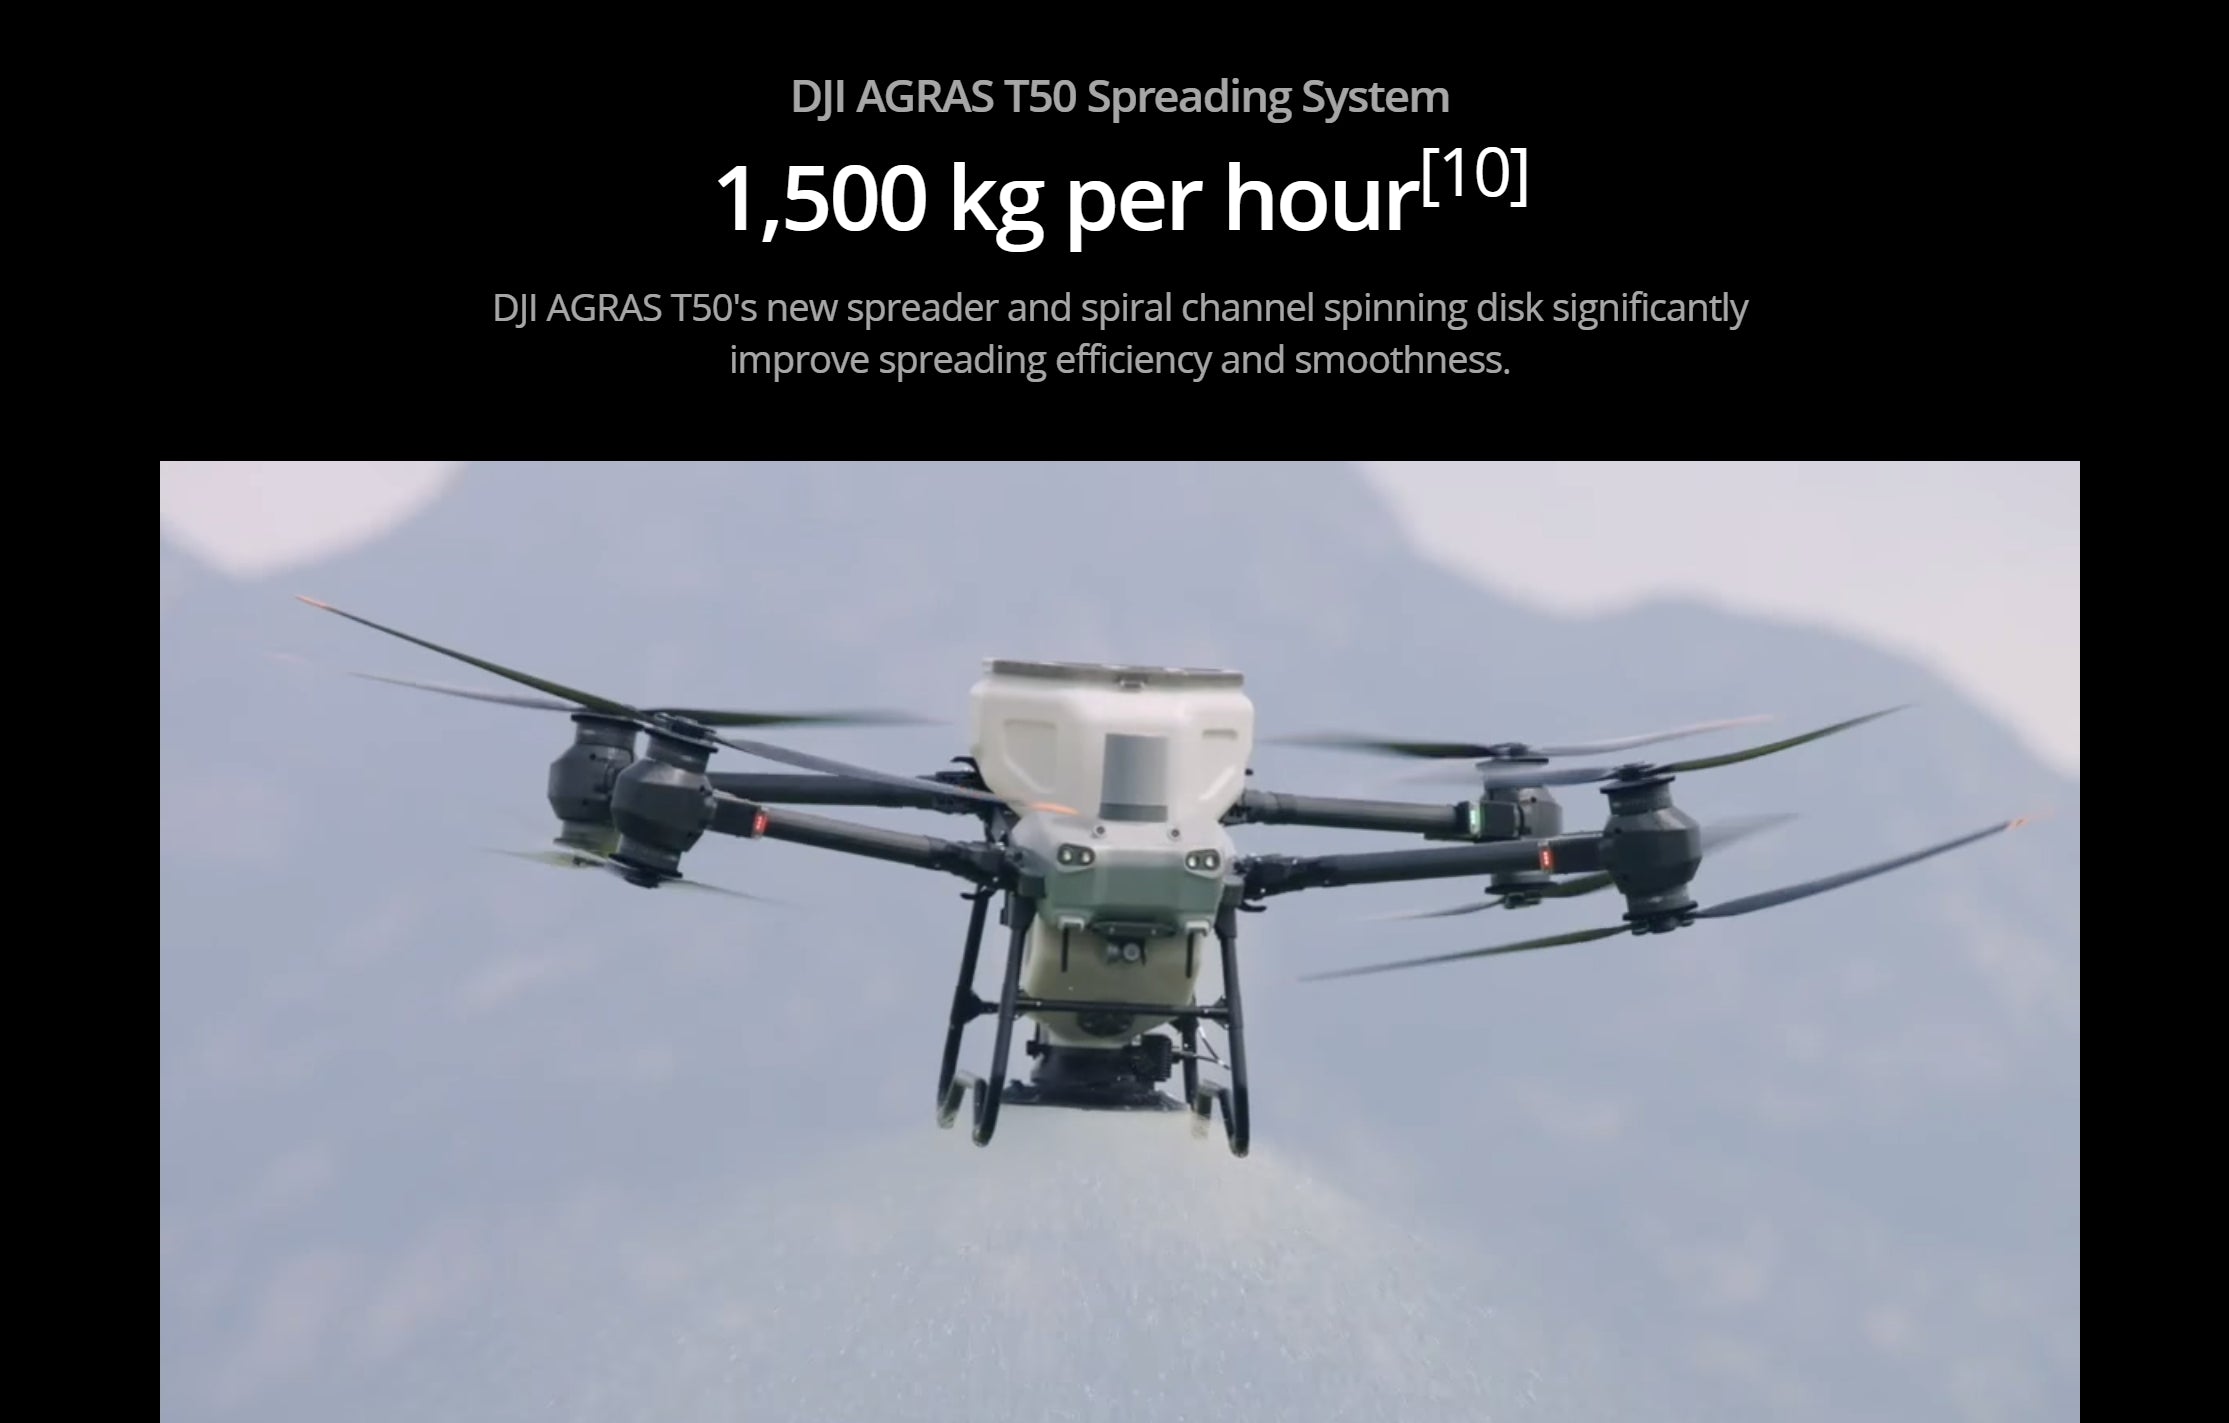 DJI Agras T50 , Agriculture drone for efficient spraying and spreading, carrying up to 40kg/50kg loads.